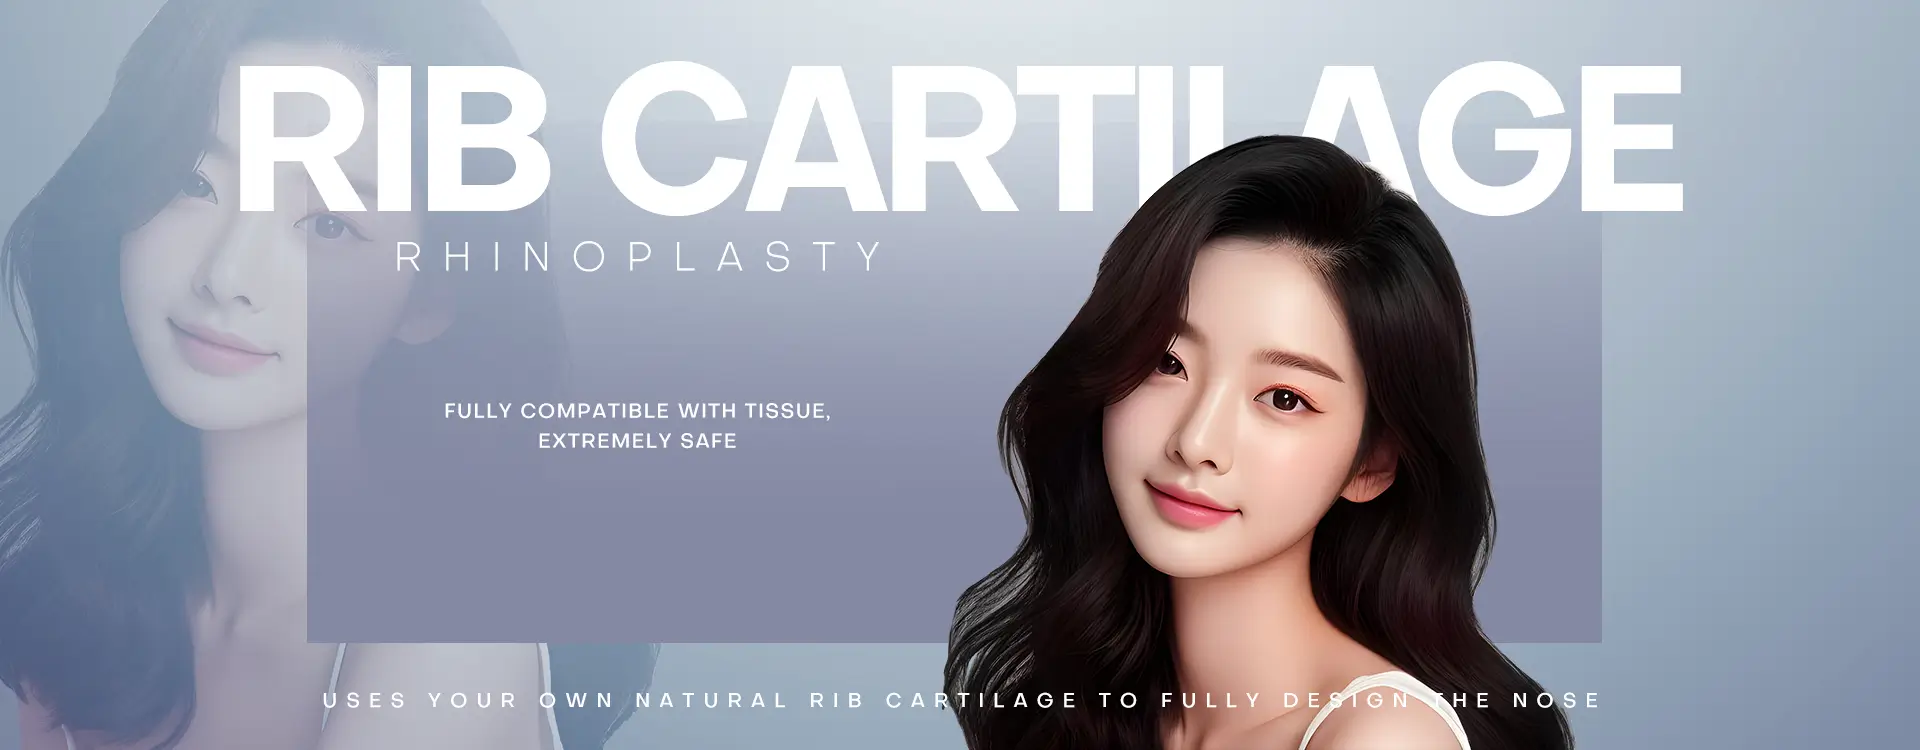 Rib Cartilage Rhinoplasty - Fully compatible with tissue, extremely safe